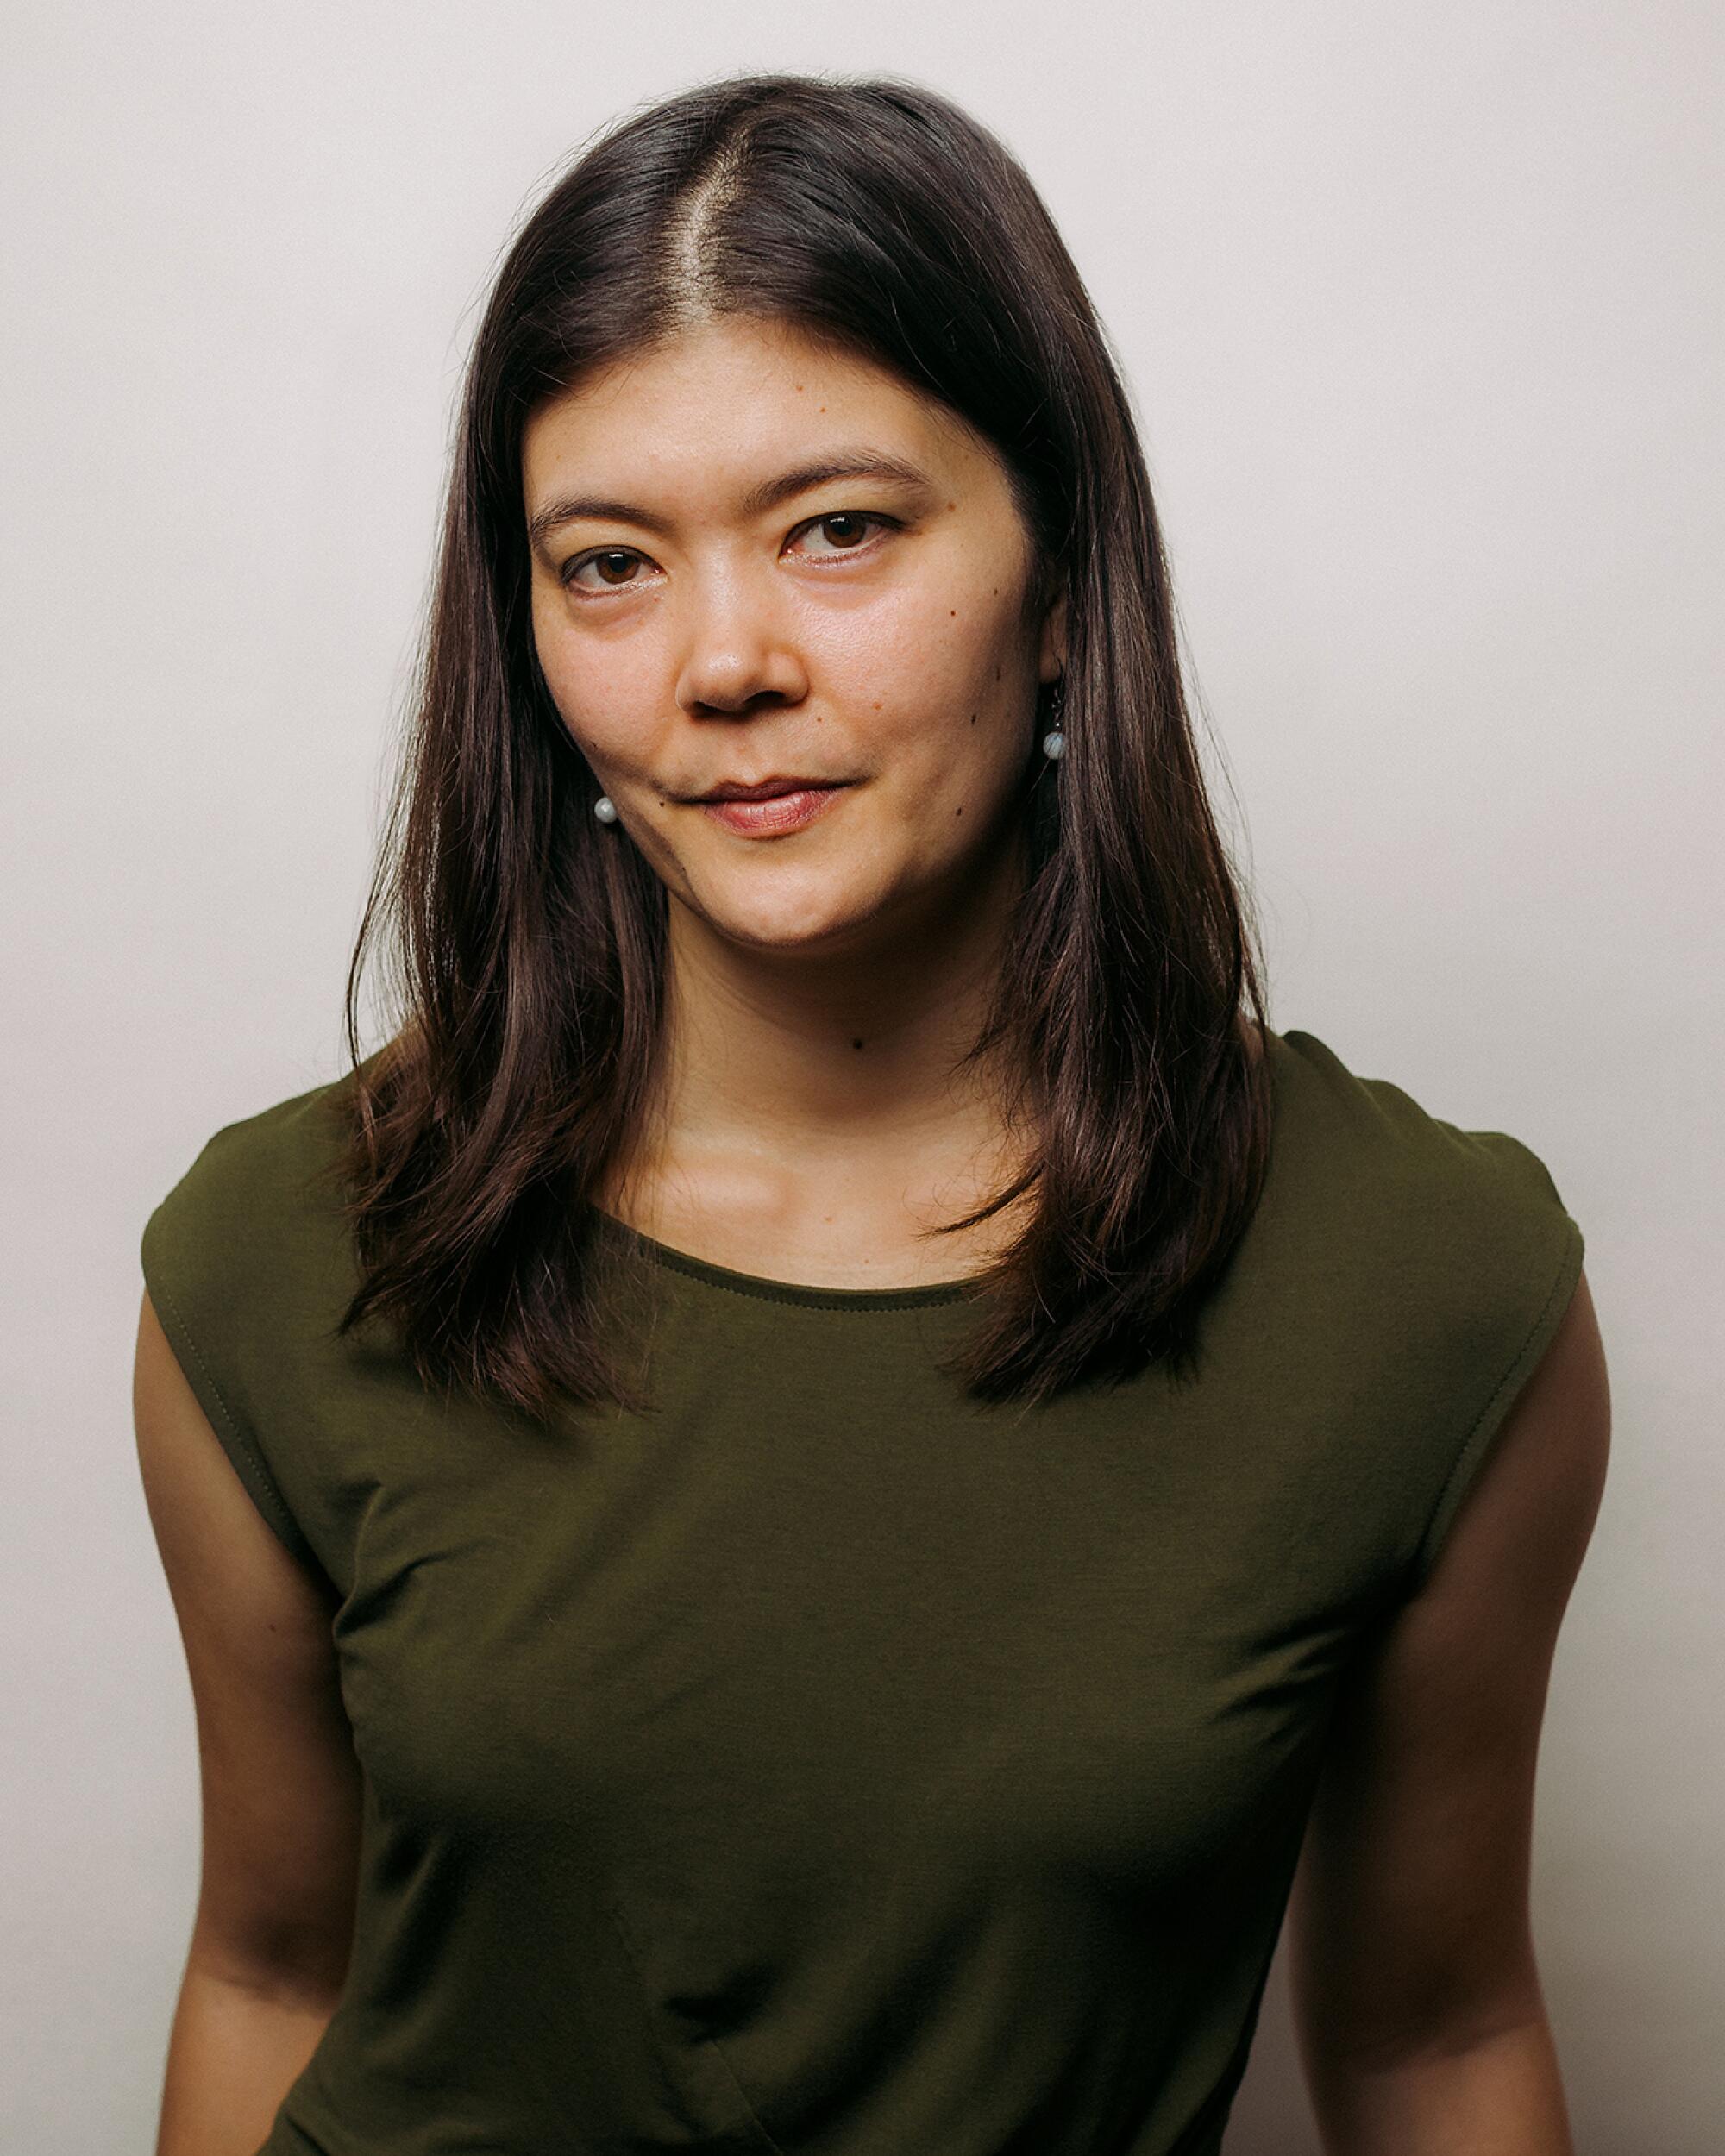 Kayla Min Andrews, a woman in a green short-sleeved shirt.